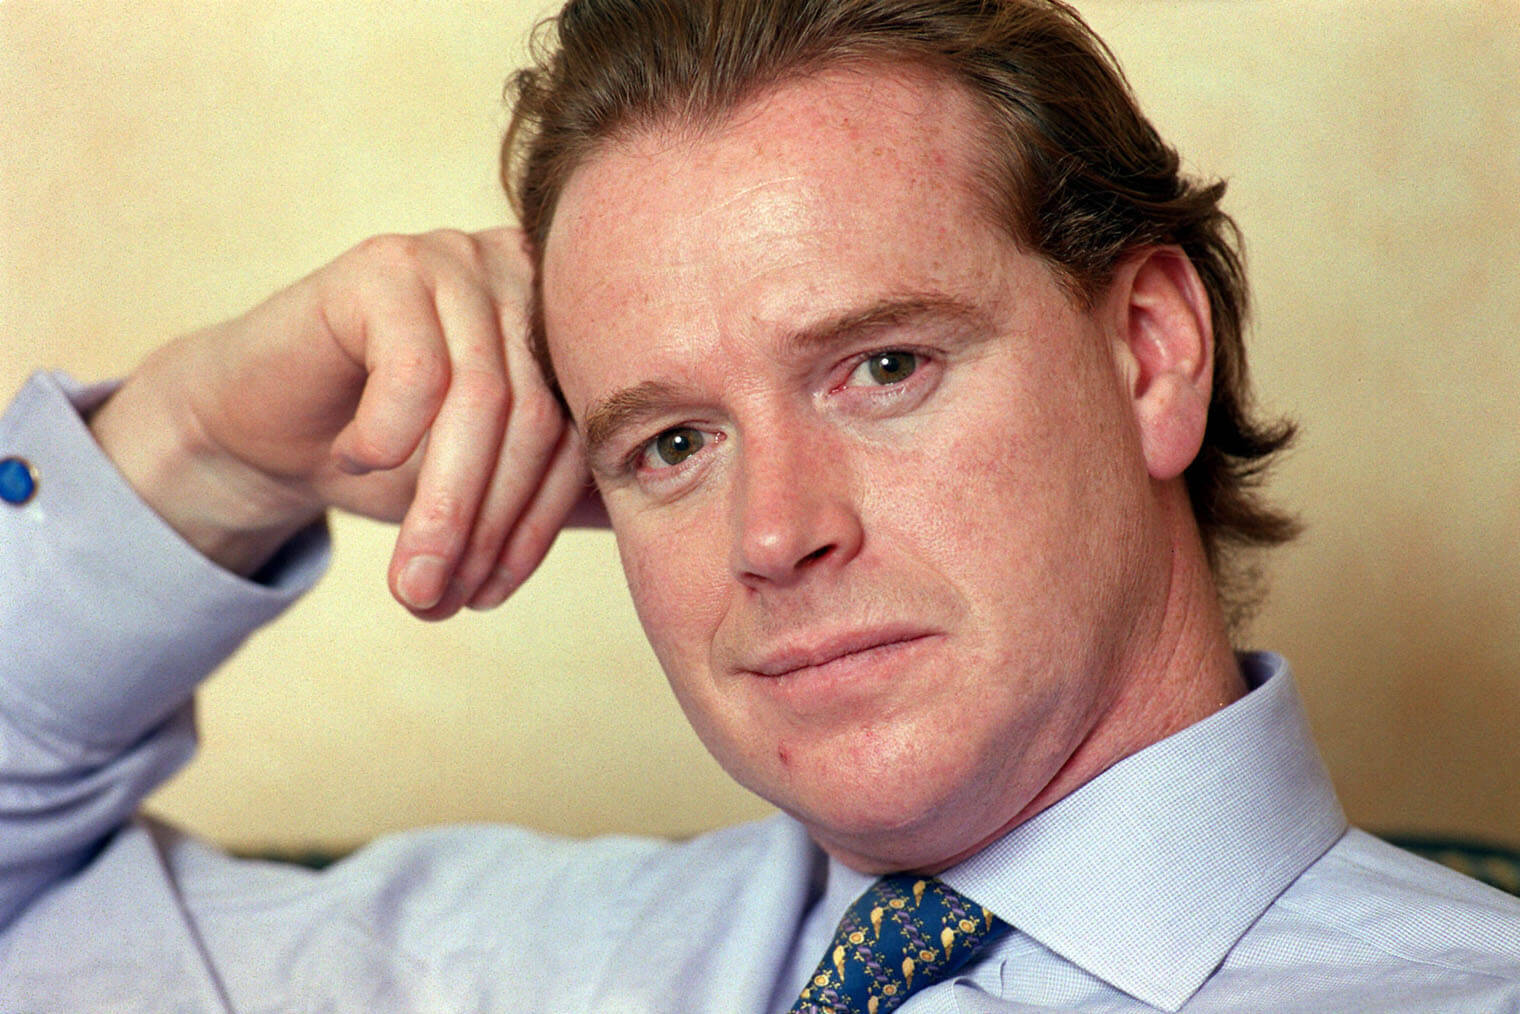 James Hewitt, Princess Diana's lover and Prince Harry's rumored real father, leaning his head against his hand